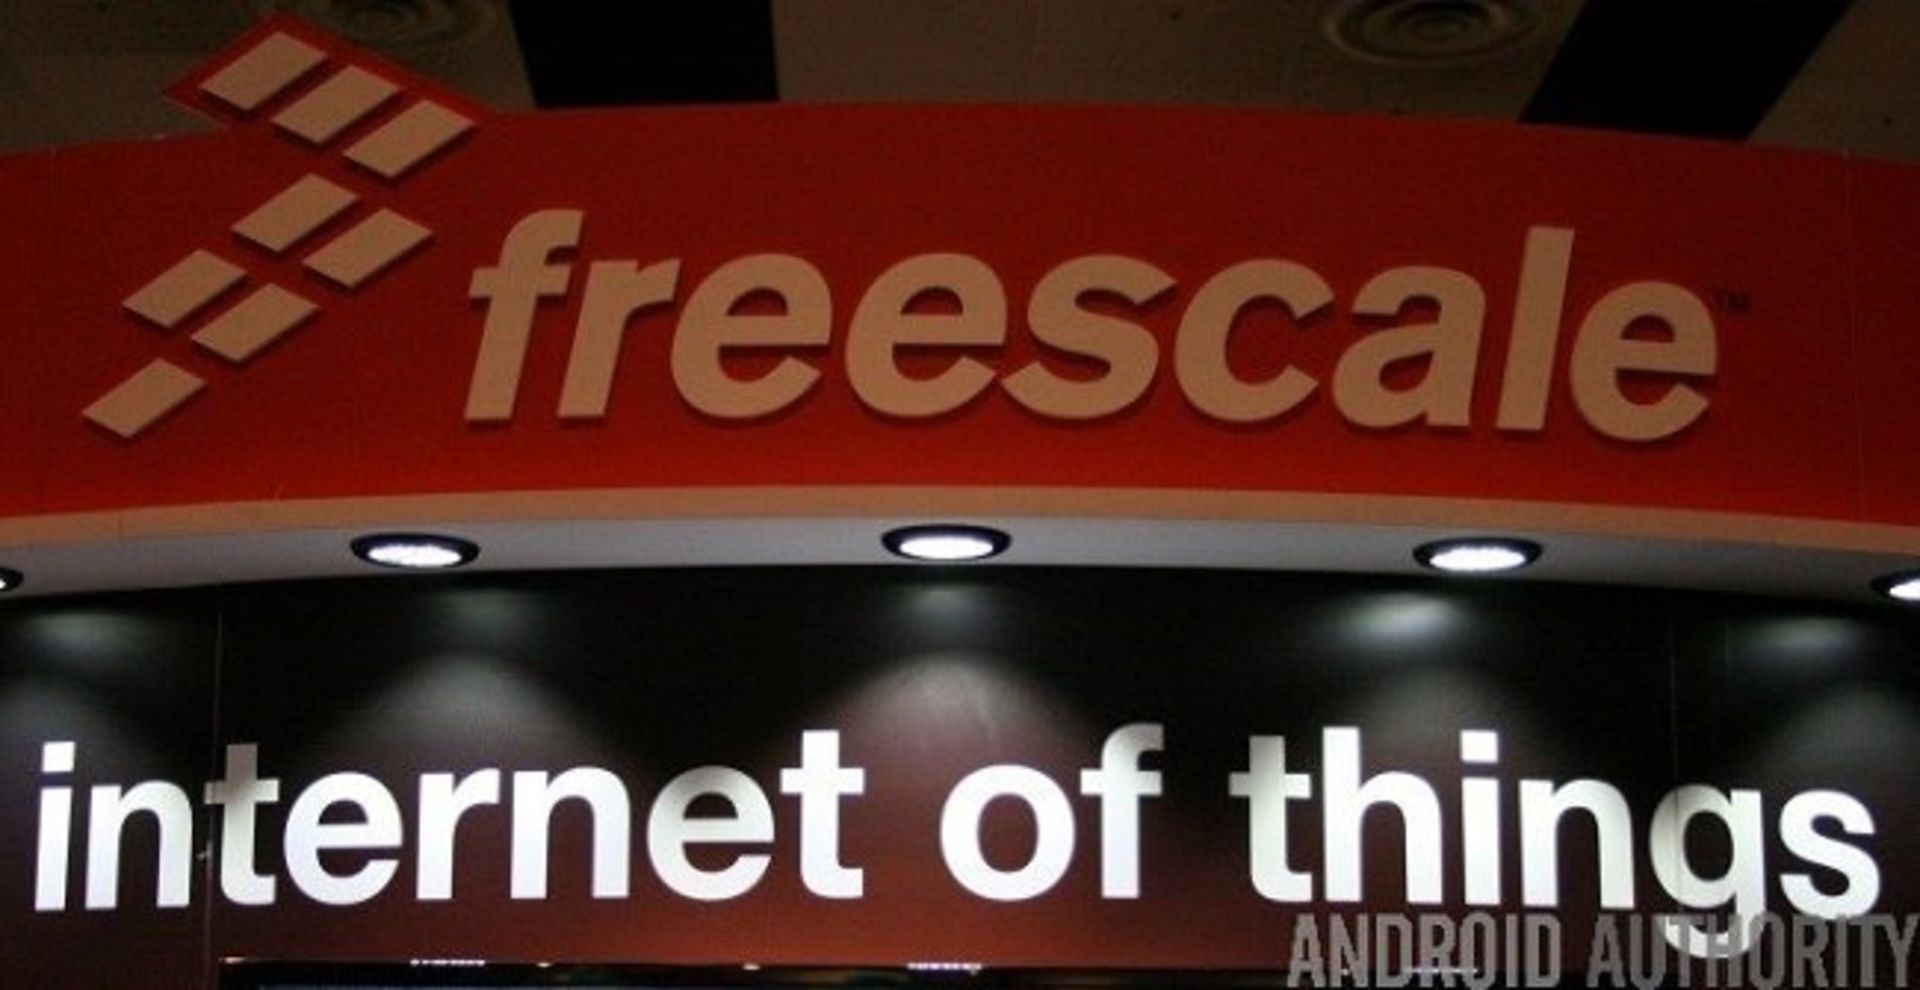 2-freescale-internet-of-things-wm-aa